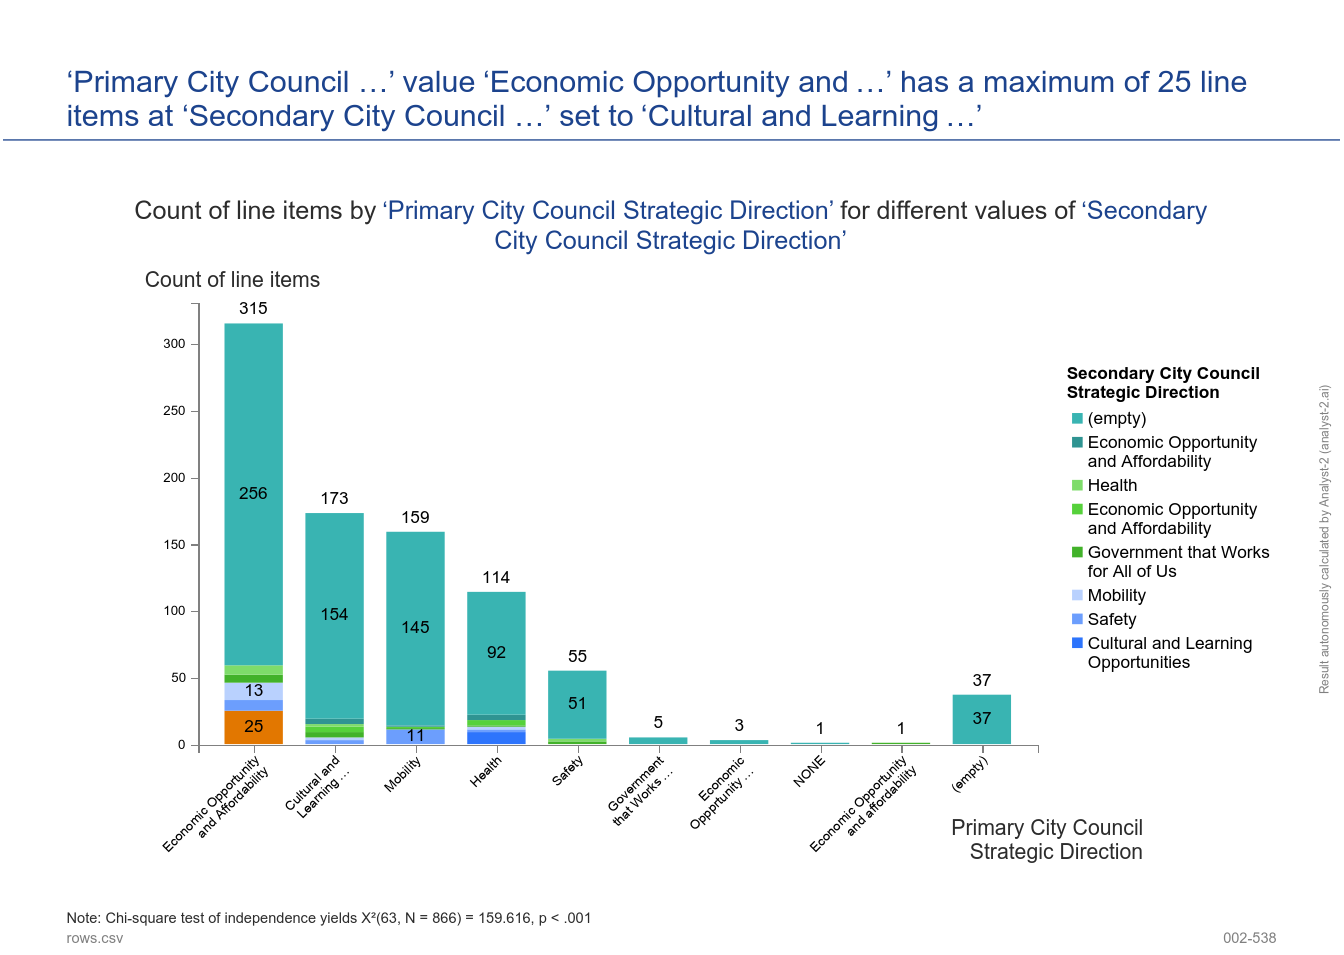 ‘Primary City Council Strategic Direction’ value ‘Economic Opportunity and Affordability’ has a maximum of 25 line items at ‘Secondary City Council Strategic Direction’ set to ‘Cultural and Learning Opportunities’. (Spirit Of East Austin Feedback Data - 002-538)